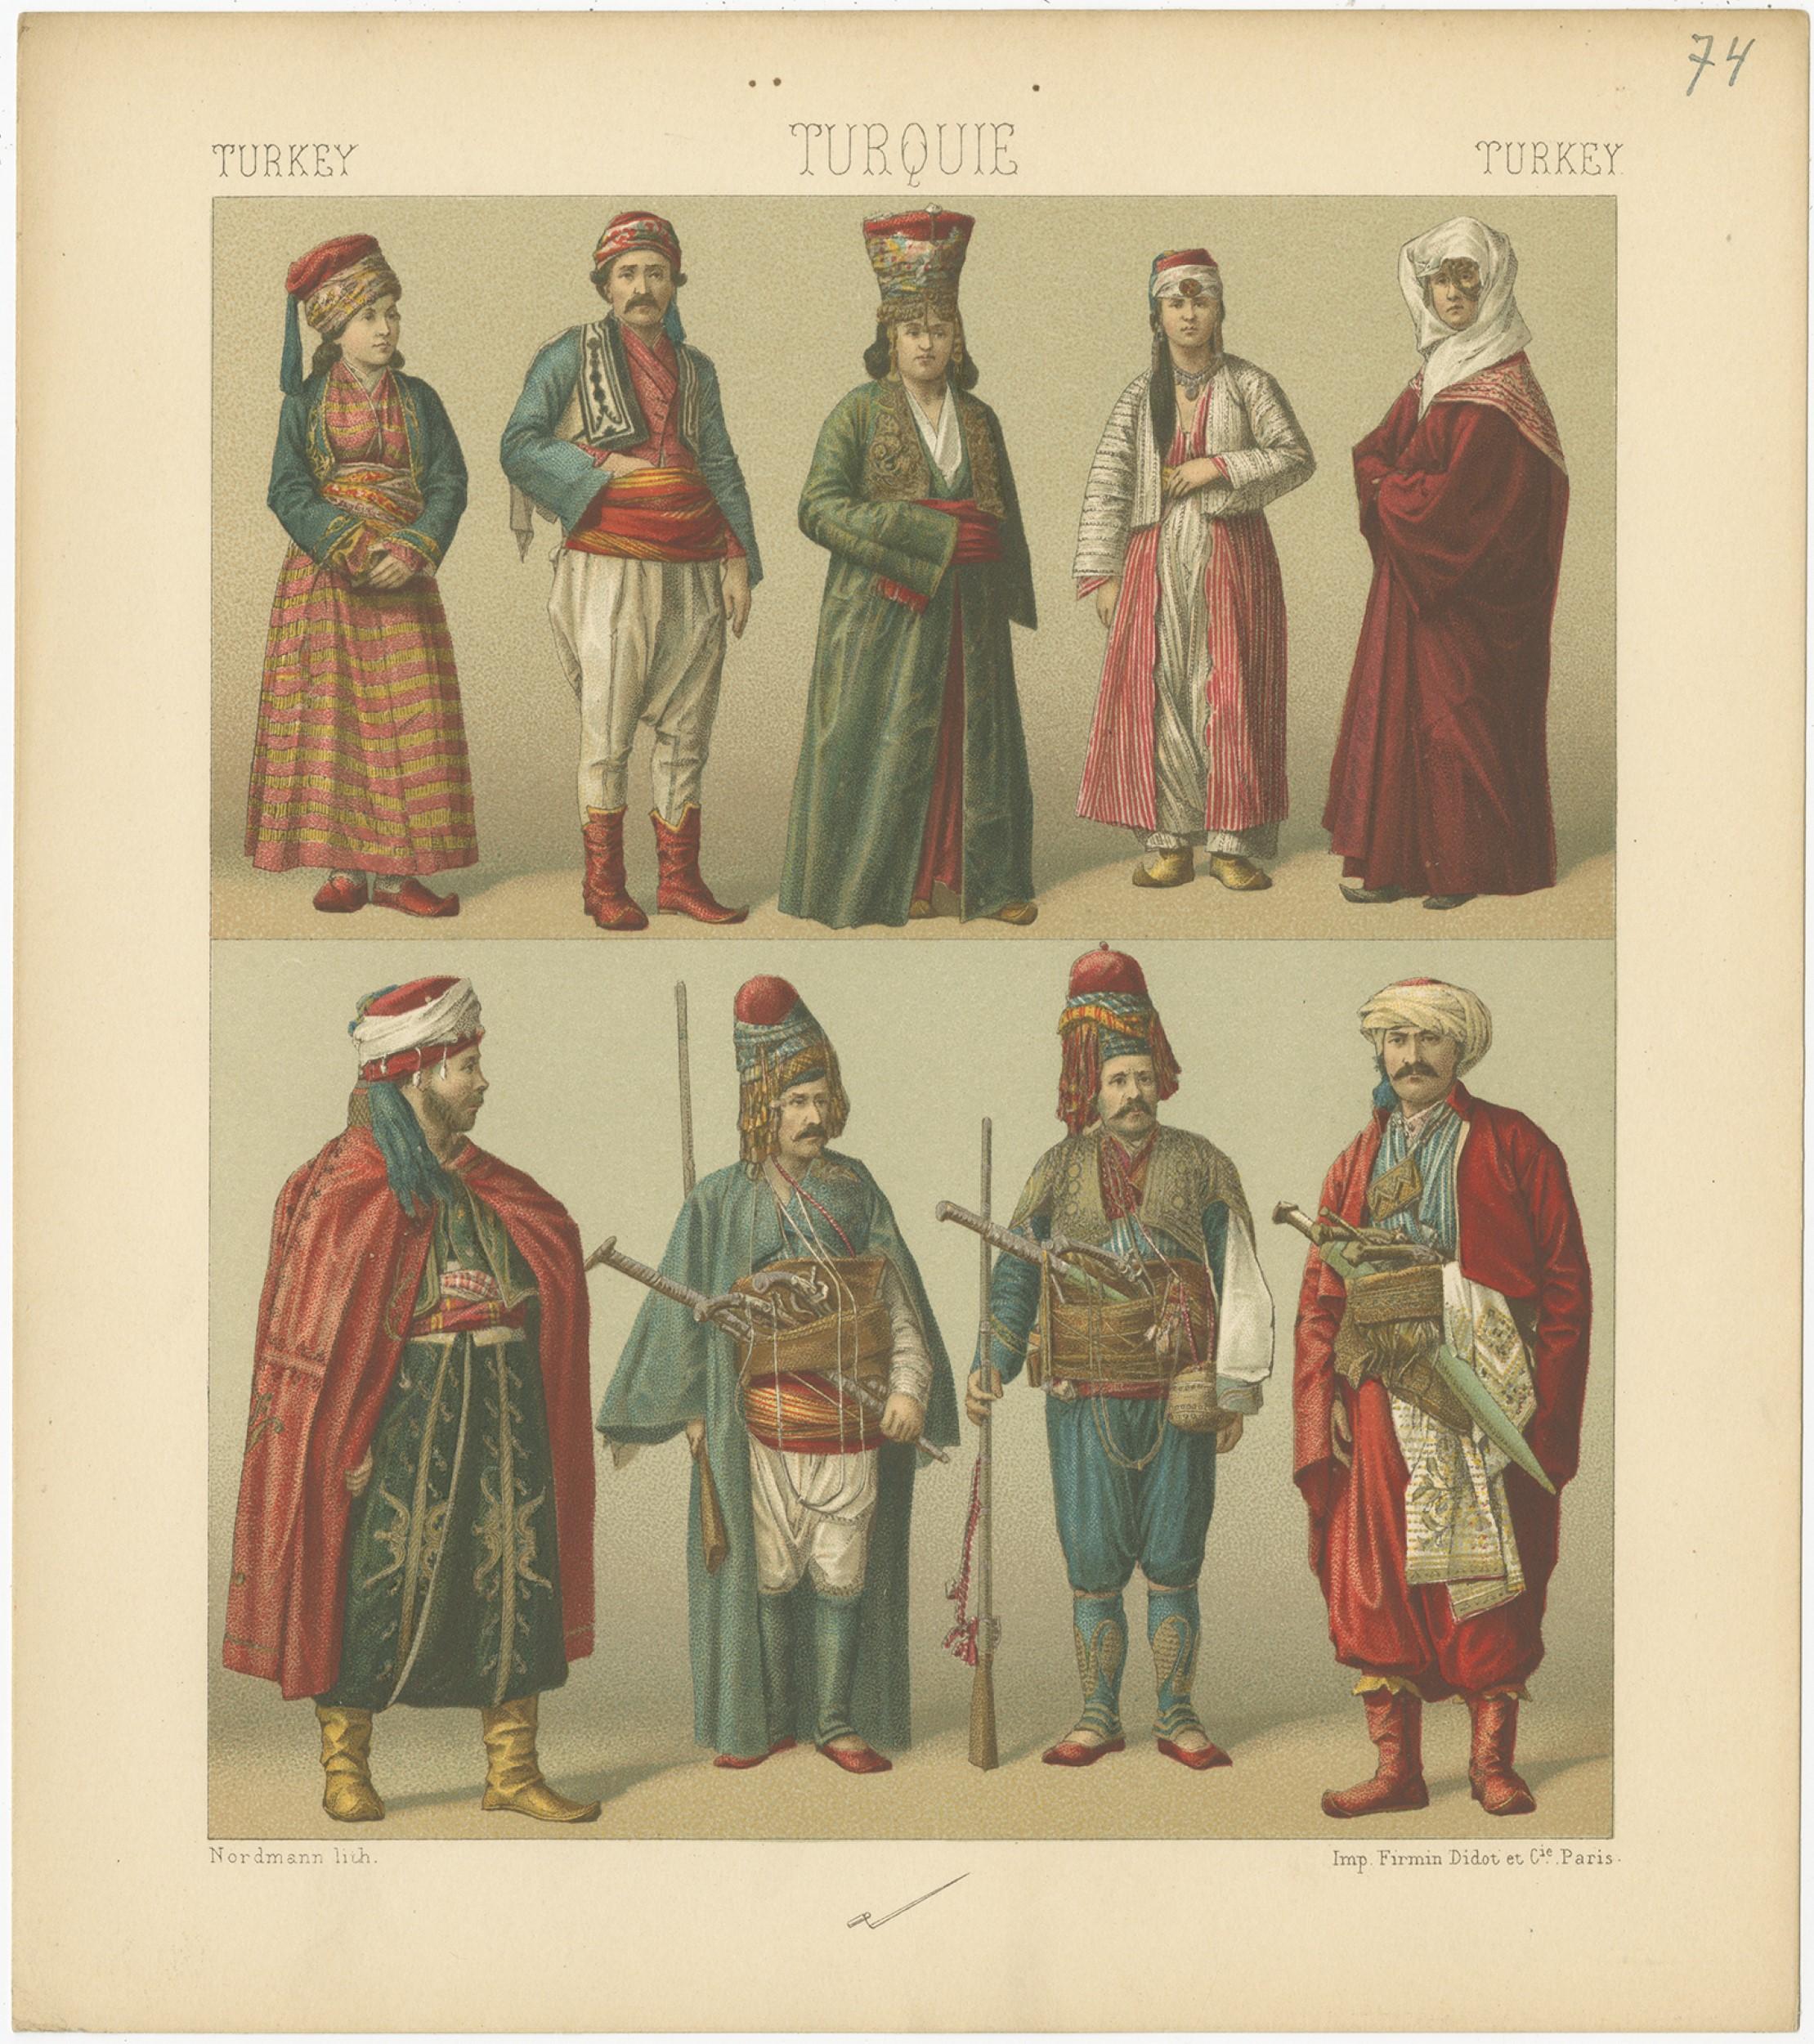 Antique print titled 'Turkey - Turque - Turkey'. Chromolithograph of Turkish costumes. This print originates from 'Le Costume Historique' by M.A. Racinet. Published, circa 1880.